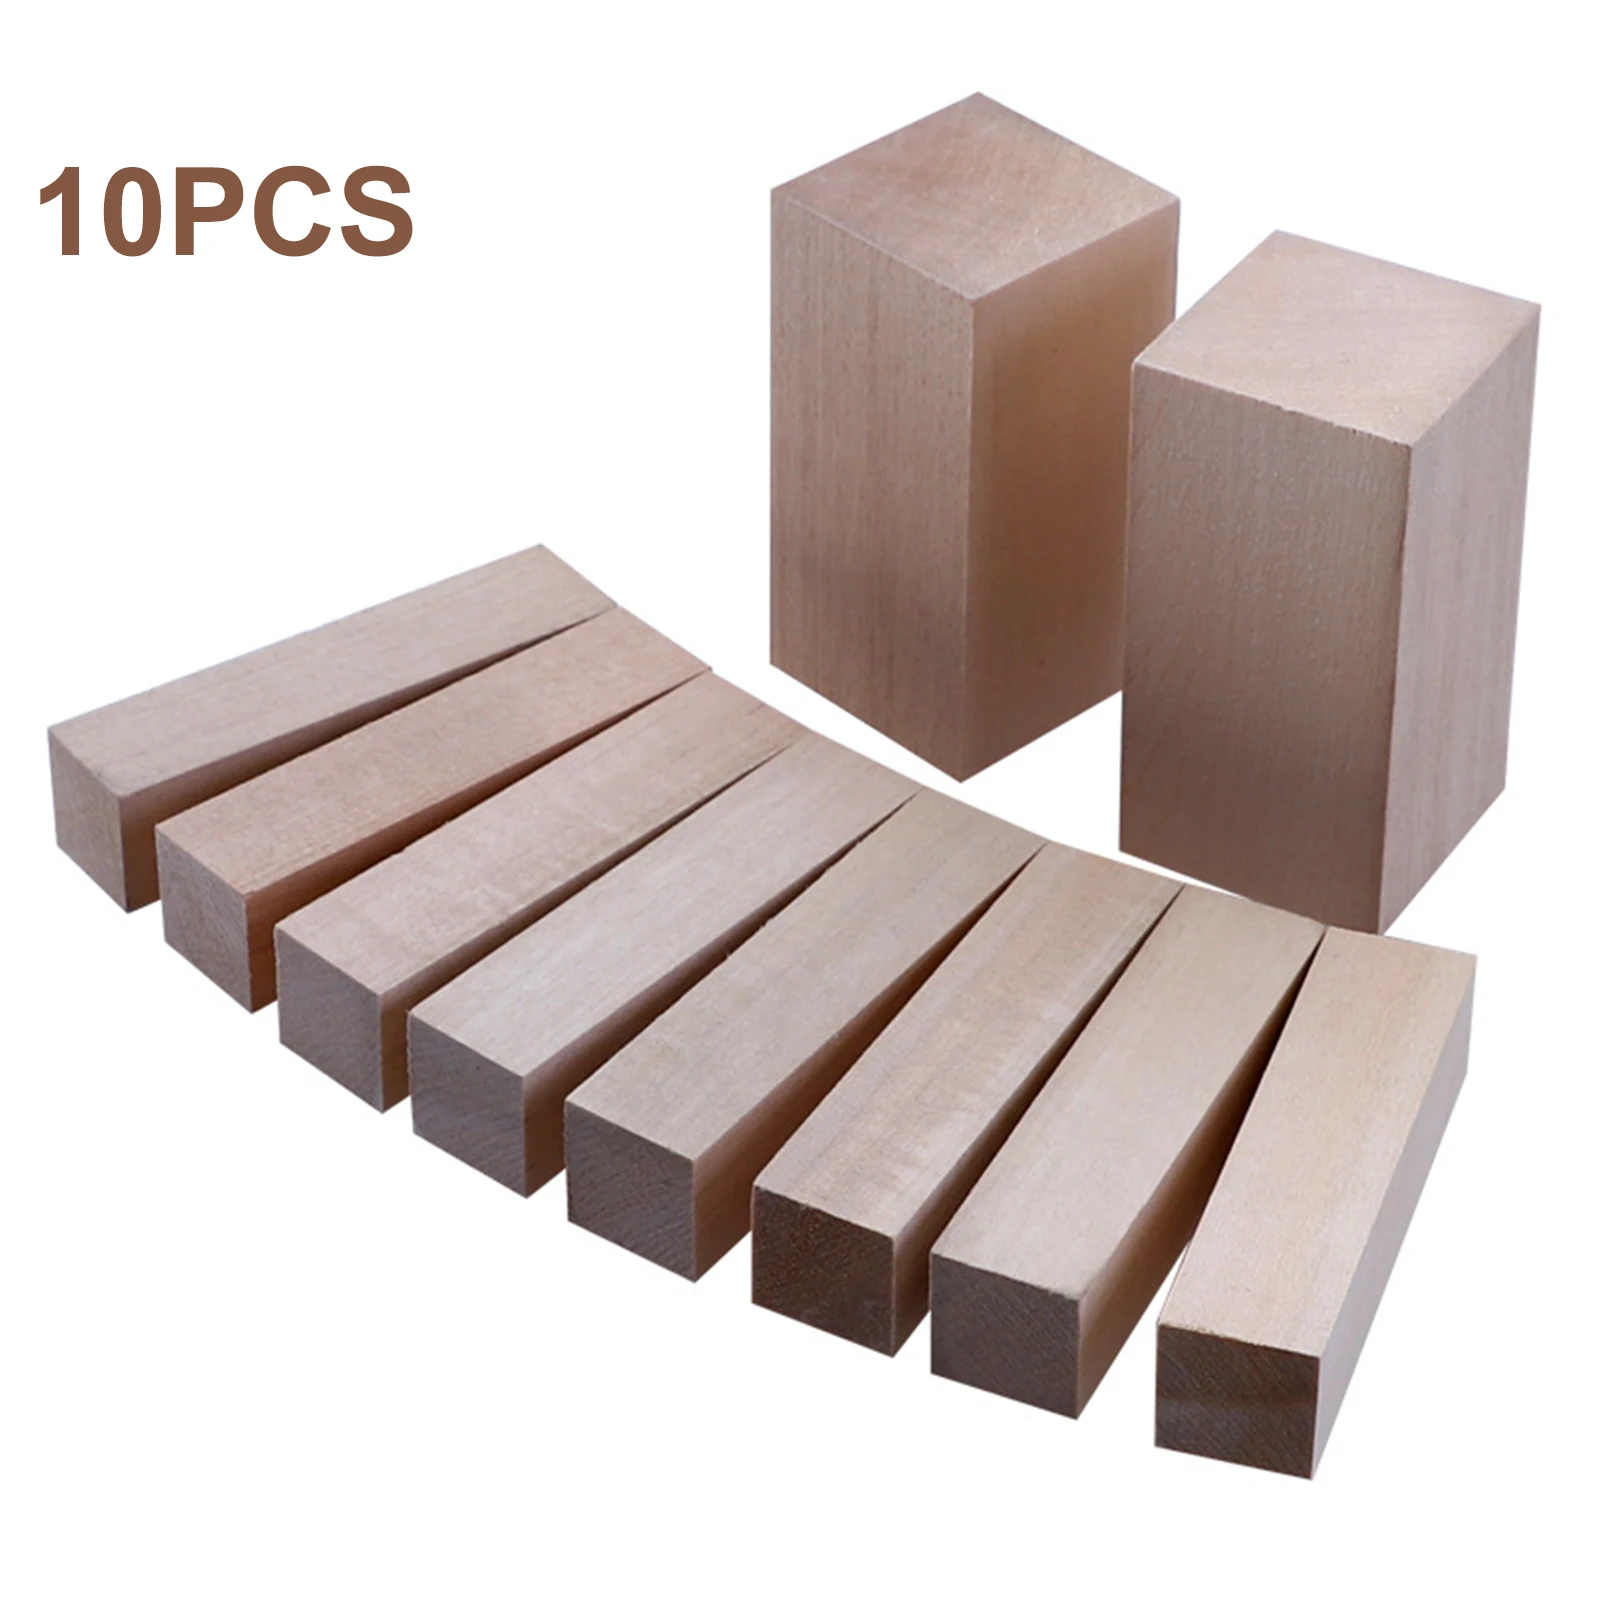 

10pcs Basswood Carving Block DIY Craft Smooth Expert Shaping Universal Beginner Ornament Unfinished Whittling 2 Sizes